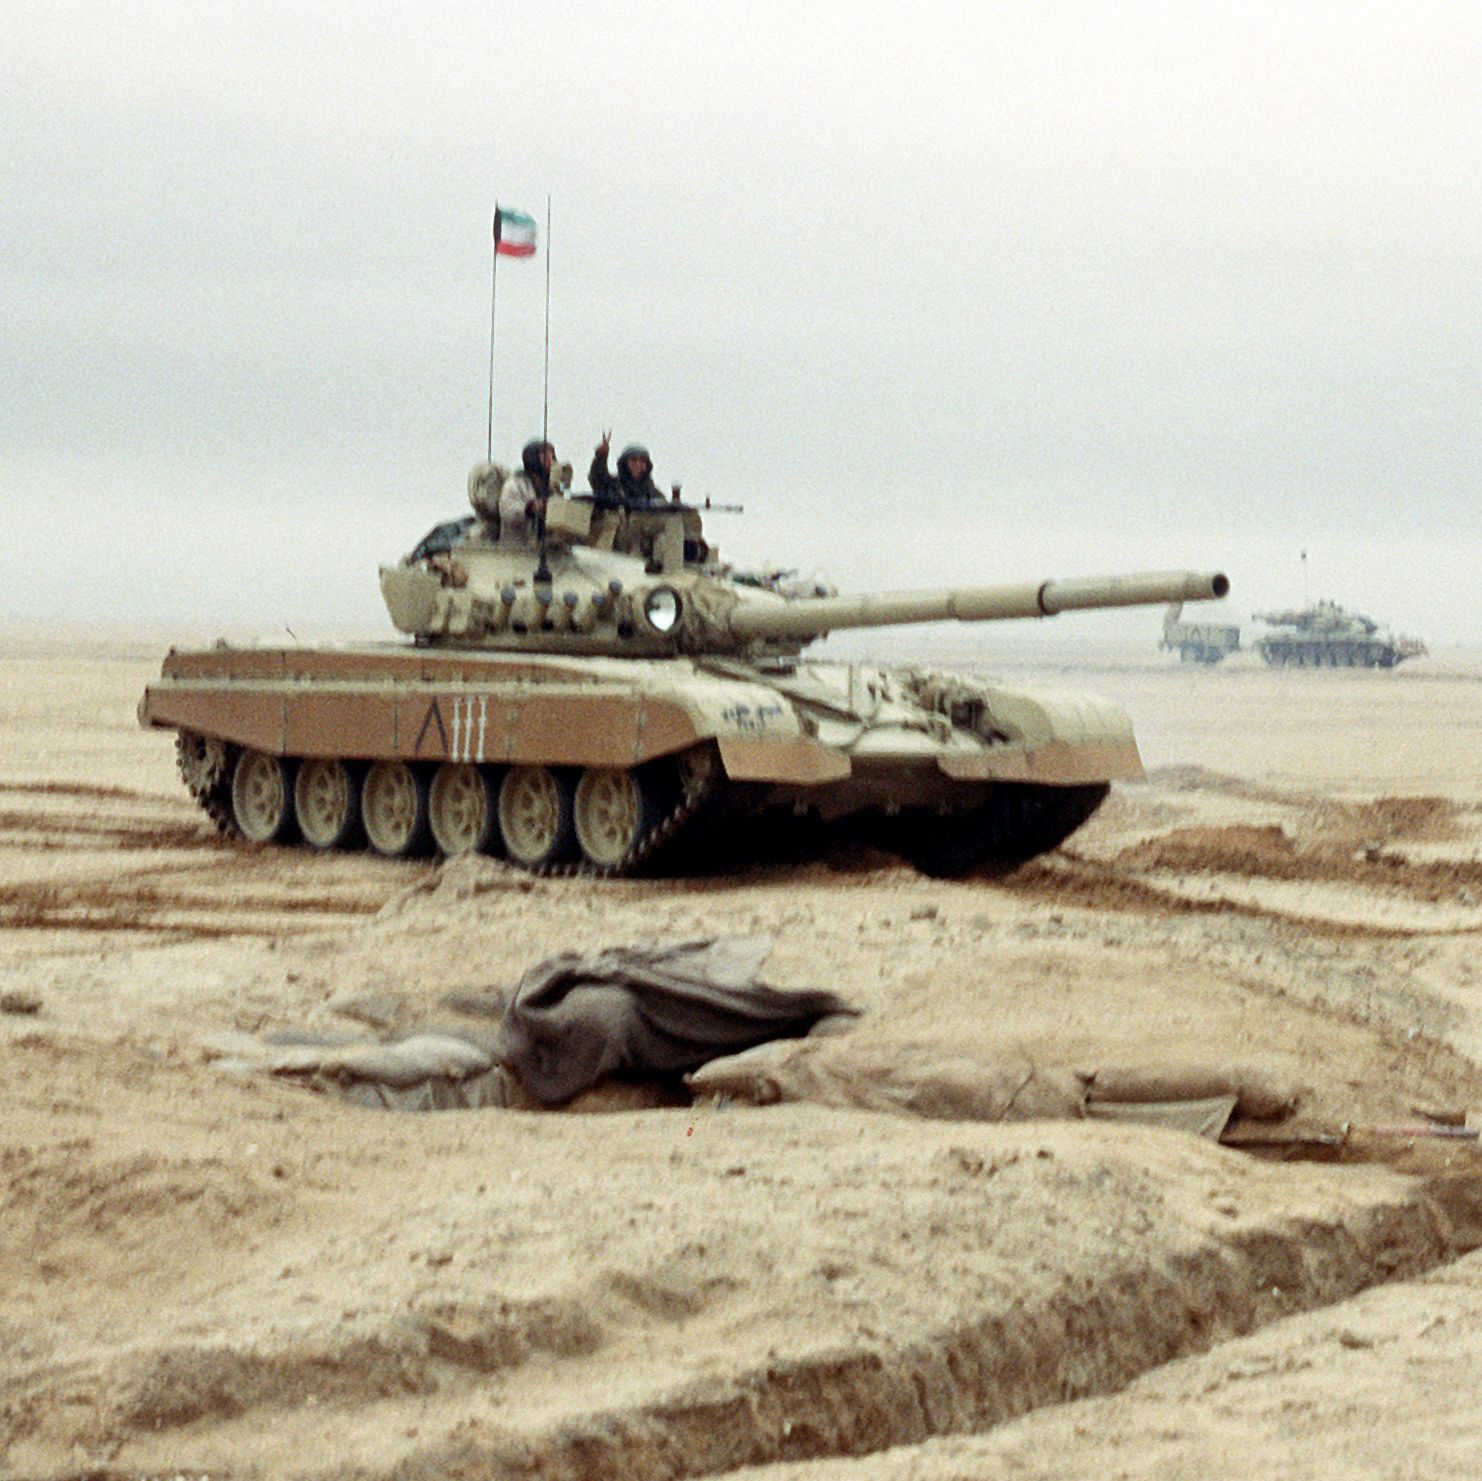 The Fearsome Tanks That Fought Saddam Hussein May Soon Come for Vladimir Putin